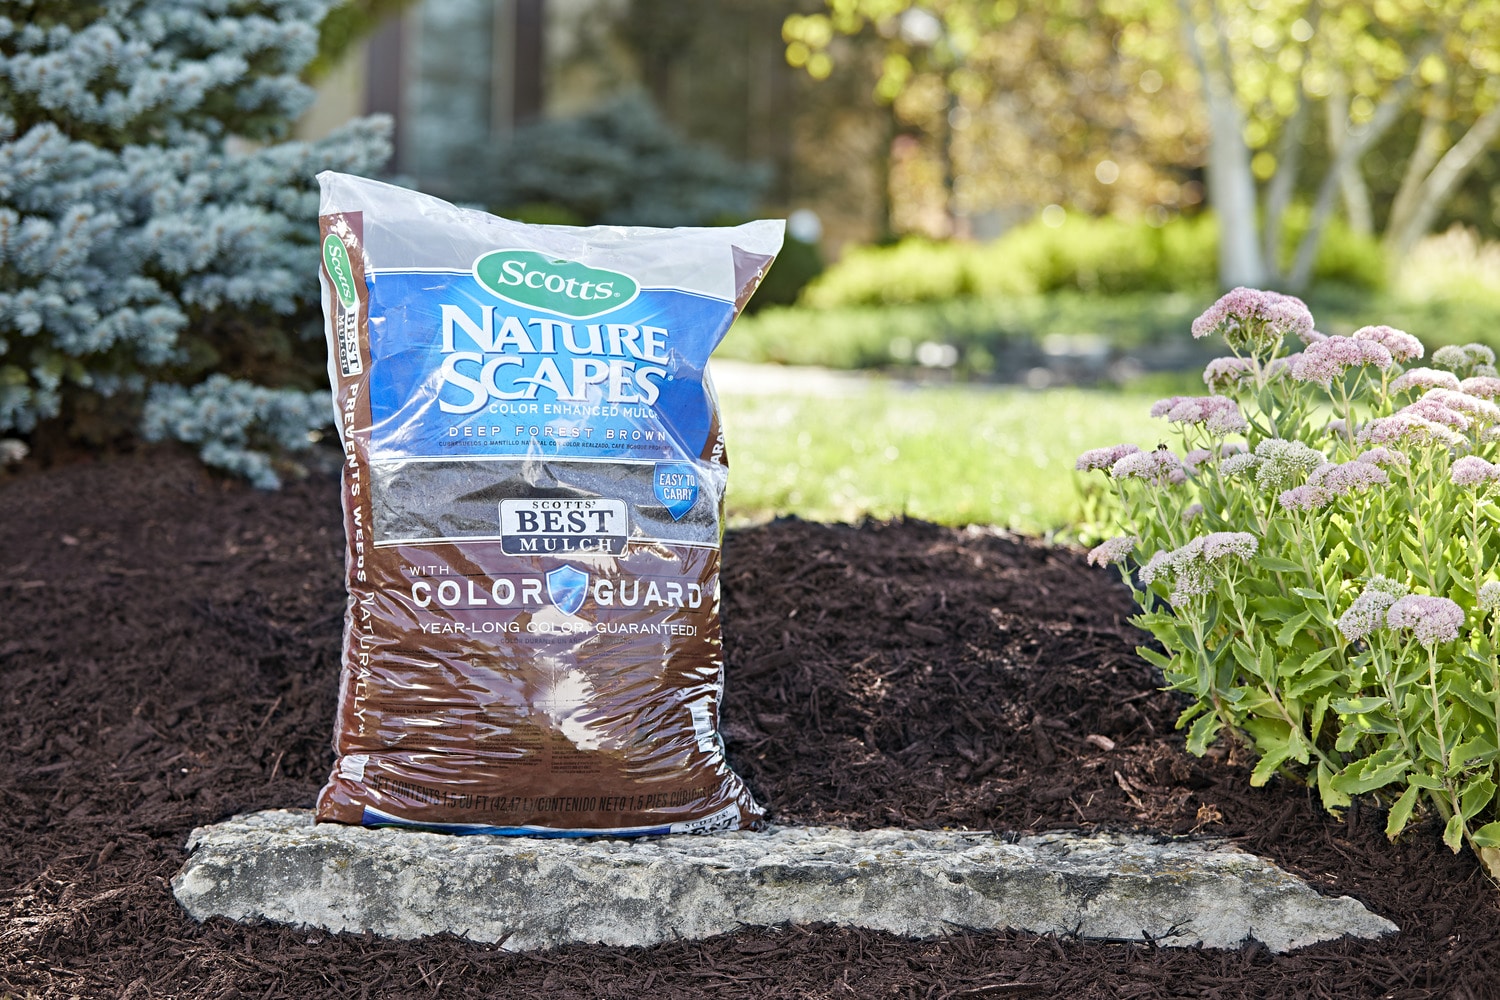 scotts-nature-scapes-color-enhanced-2-cu-ft-deep-forest-brown-mulch-at